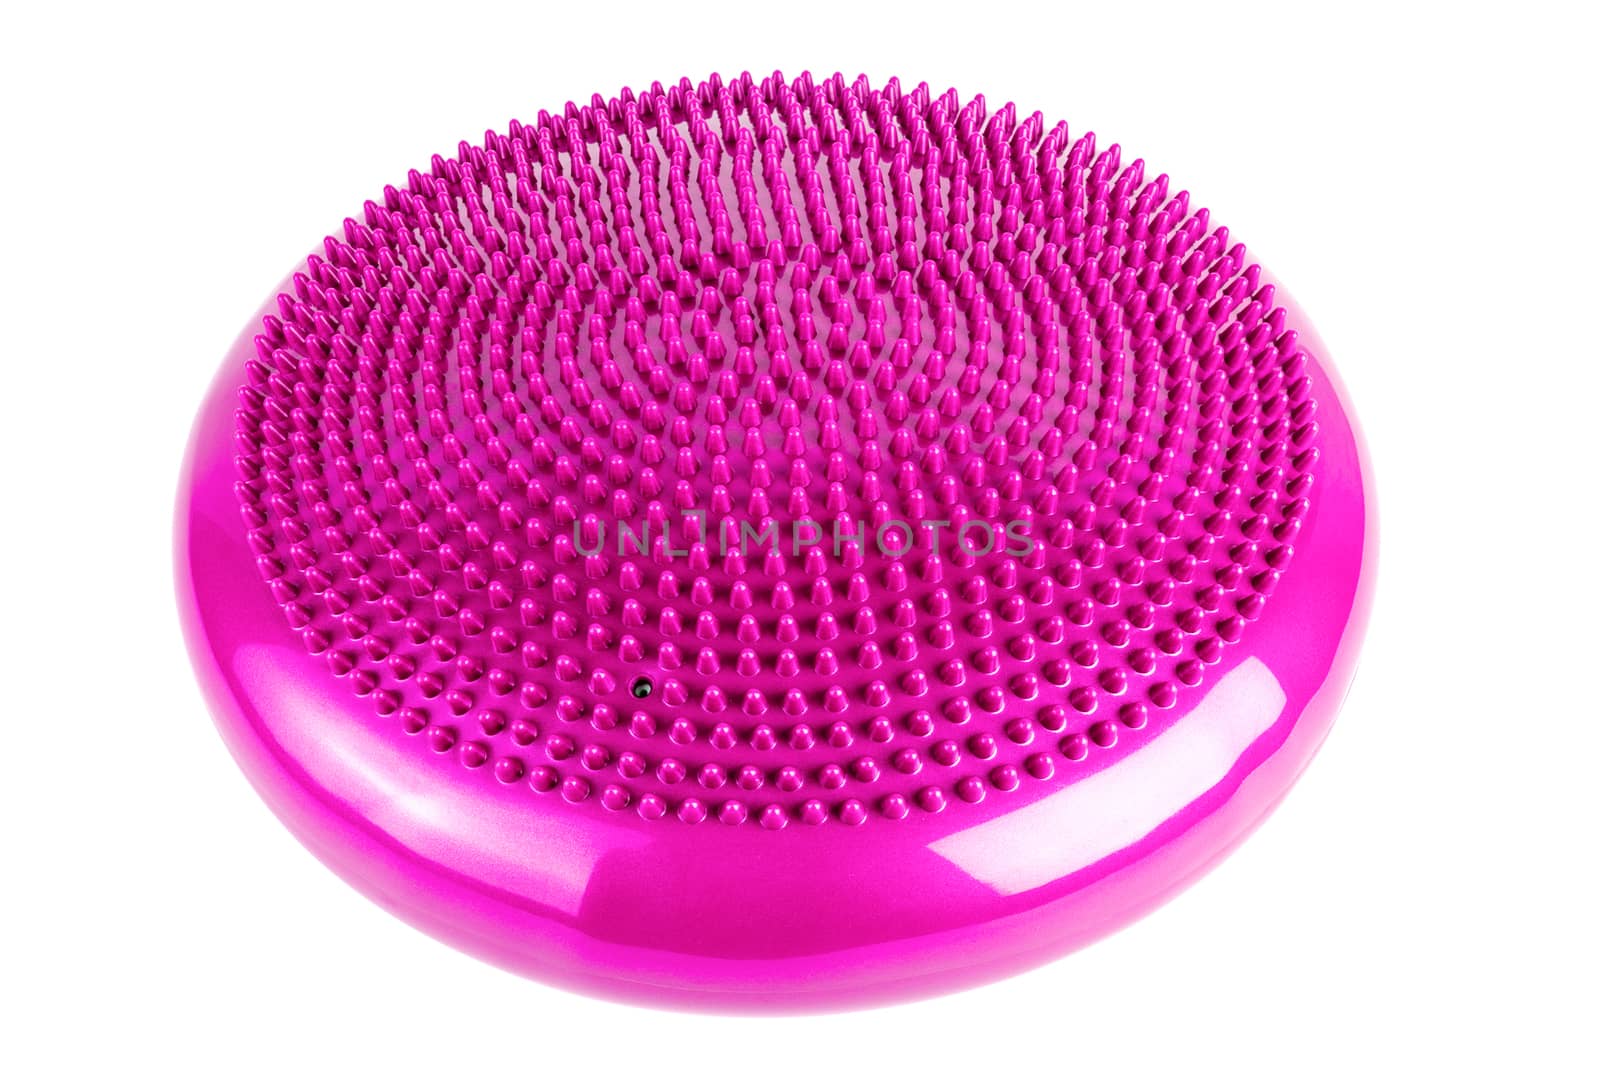 Pink inflatable balance disk isoleated on white background, It is also known as a stability disc, wobble disc, and balance cushion. by z1b